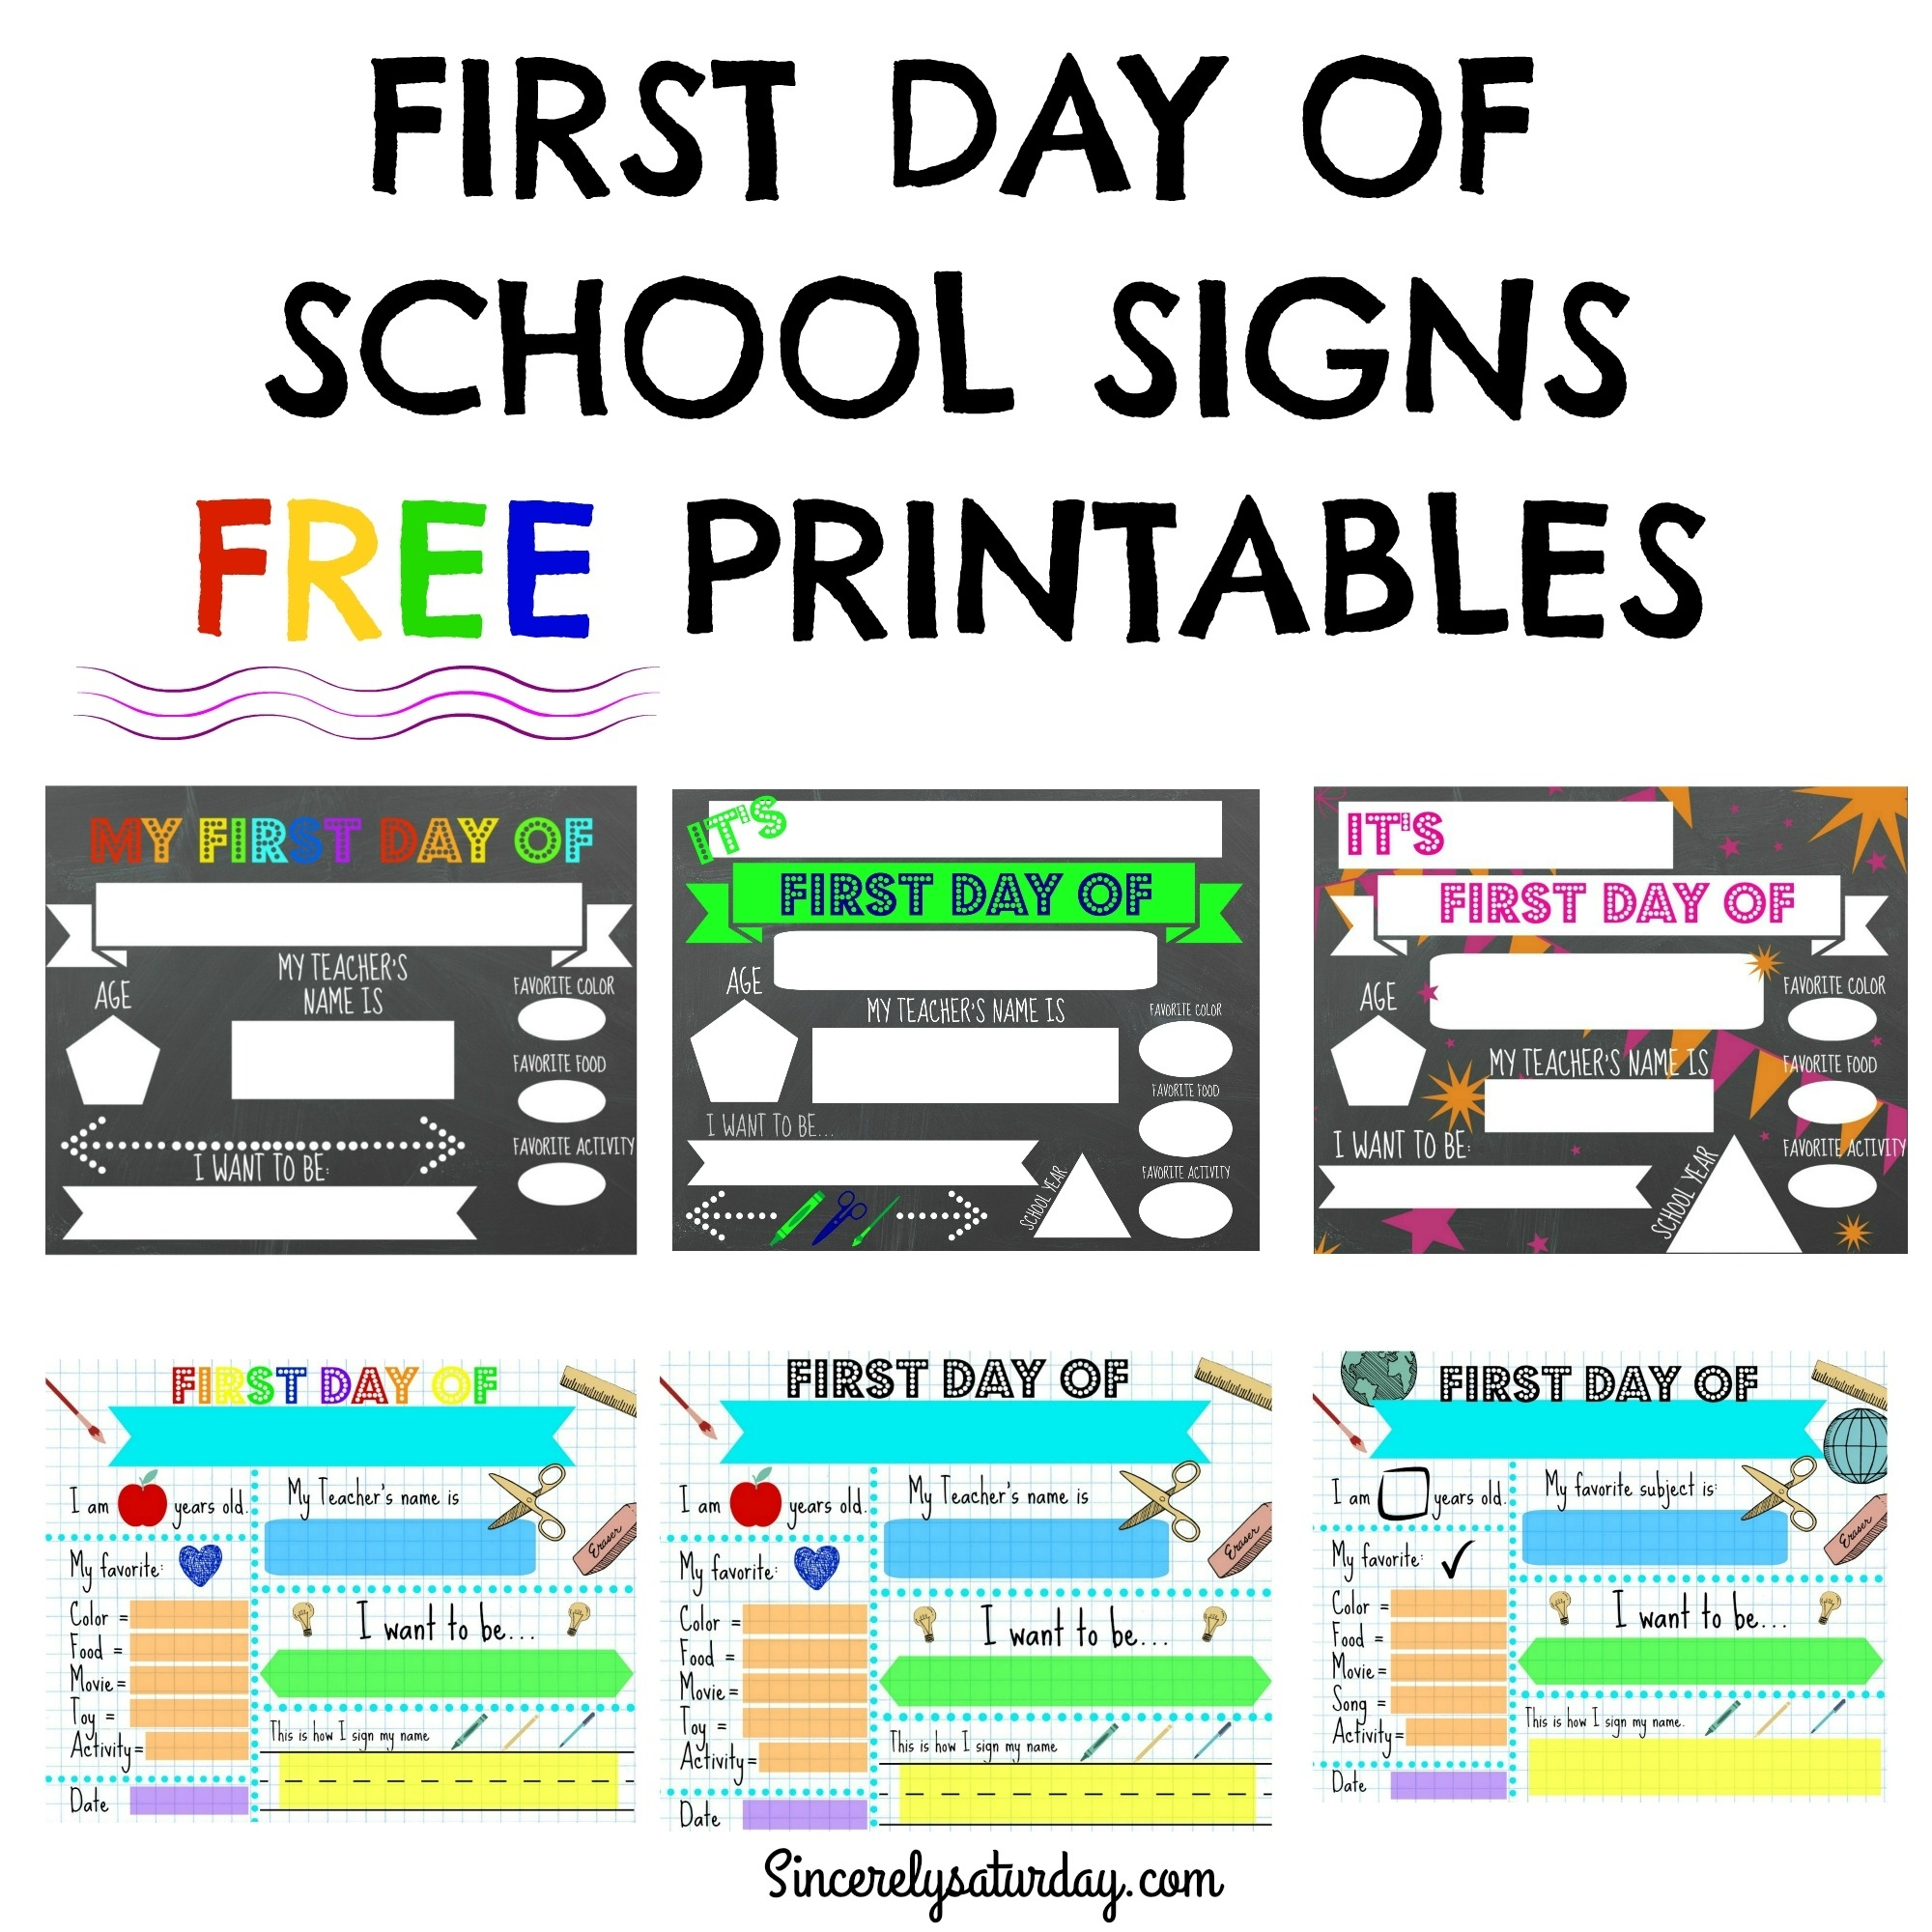 Free Printable First Day Of School Signs - Sincerely Saturday inside Free Printable First Day of School Signs